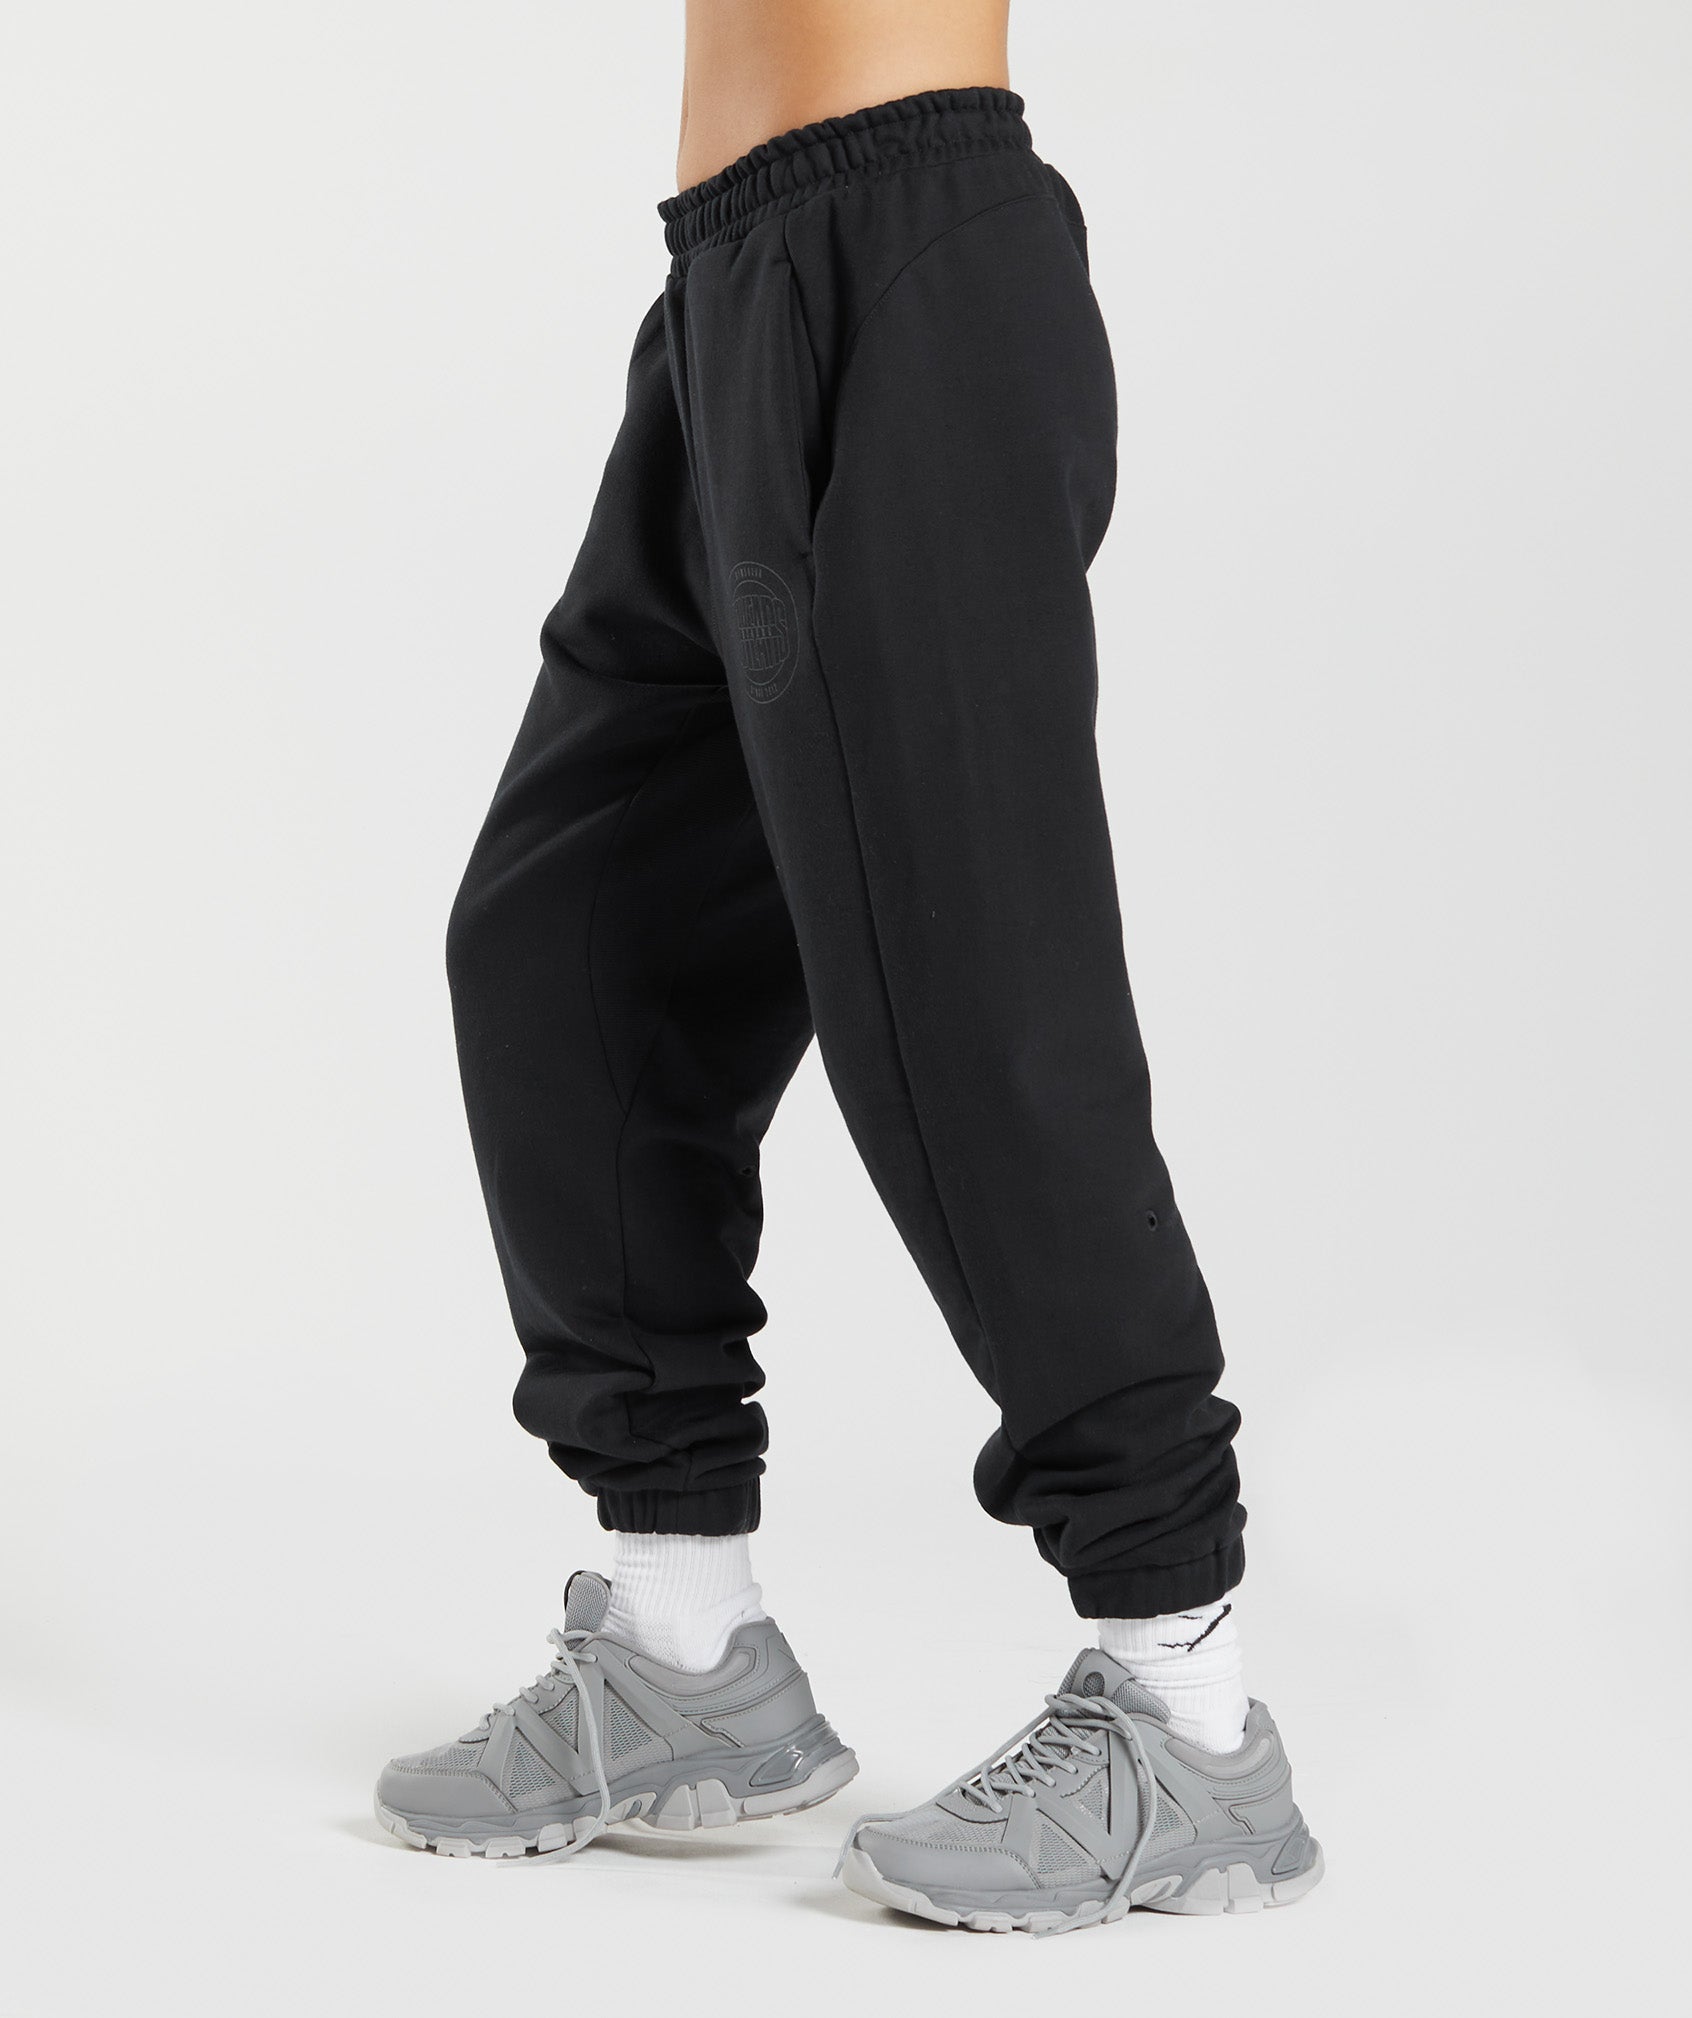 GS10 Year Joggers in Black - view 3